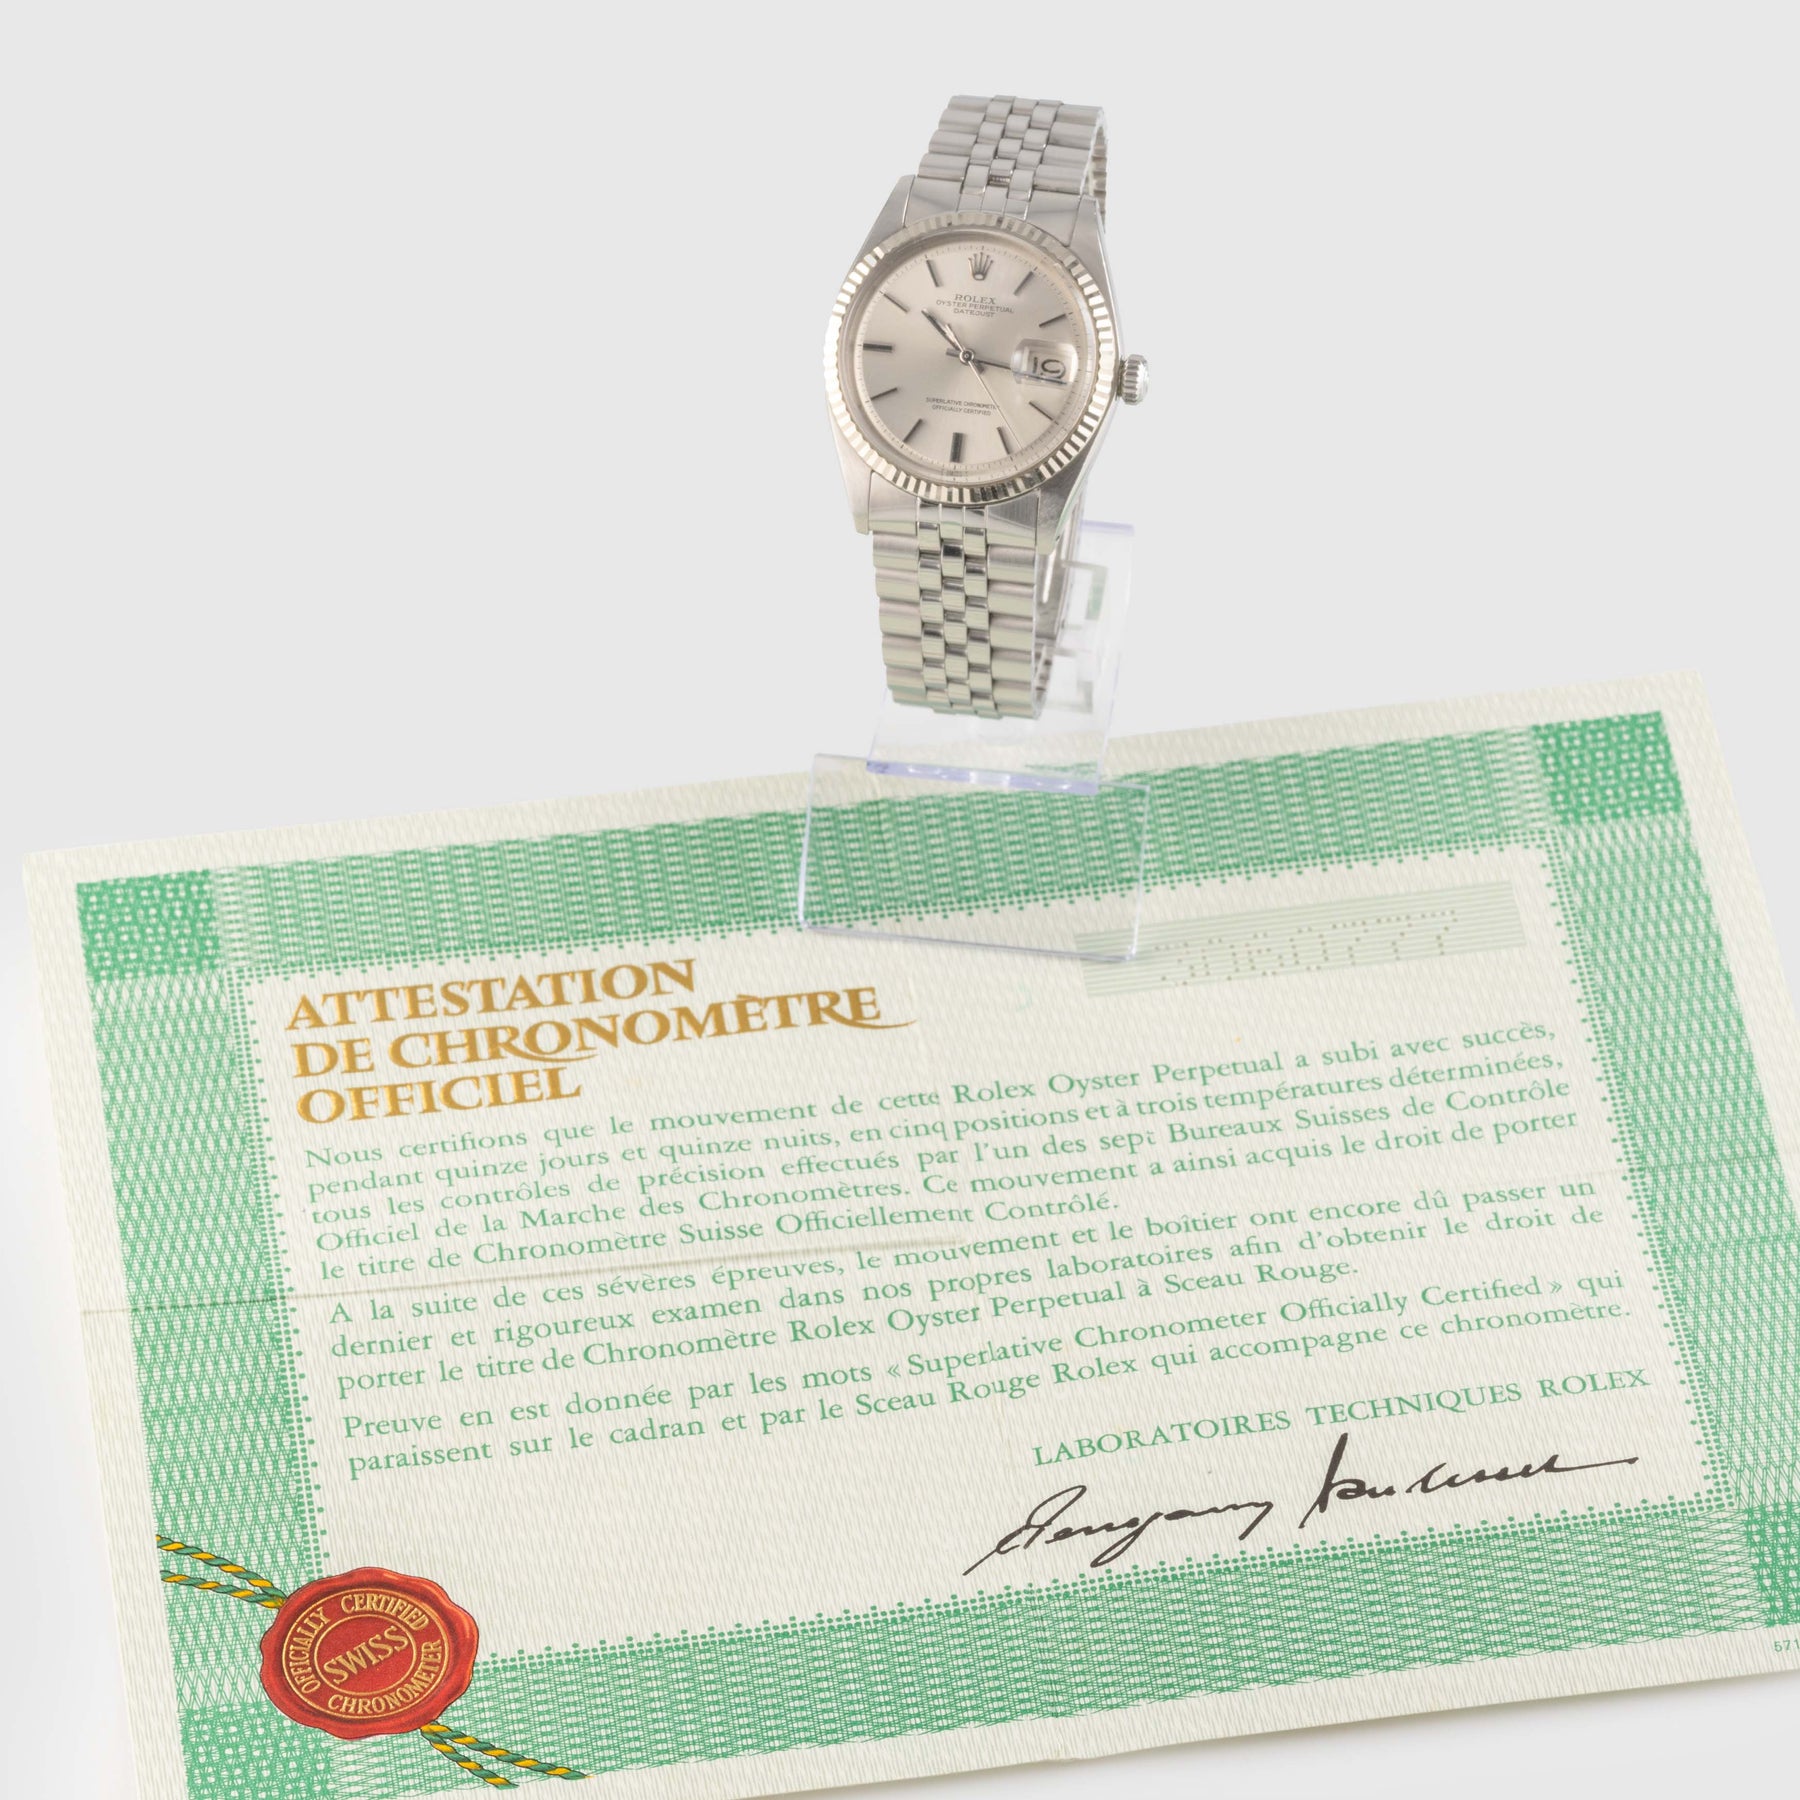 1972 Rolex Datejust Silver Dial Ref. 1601 (with papers)